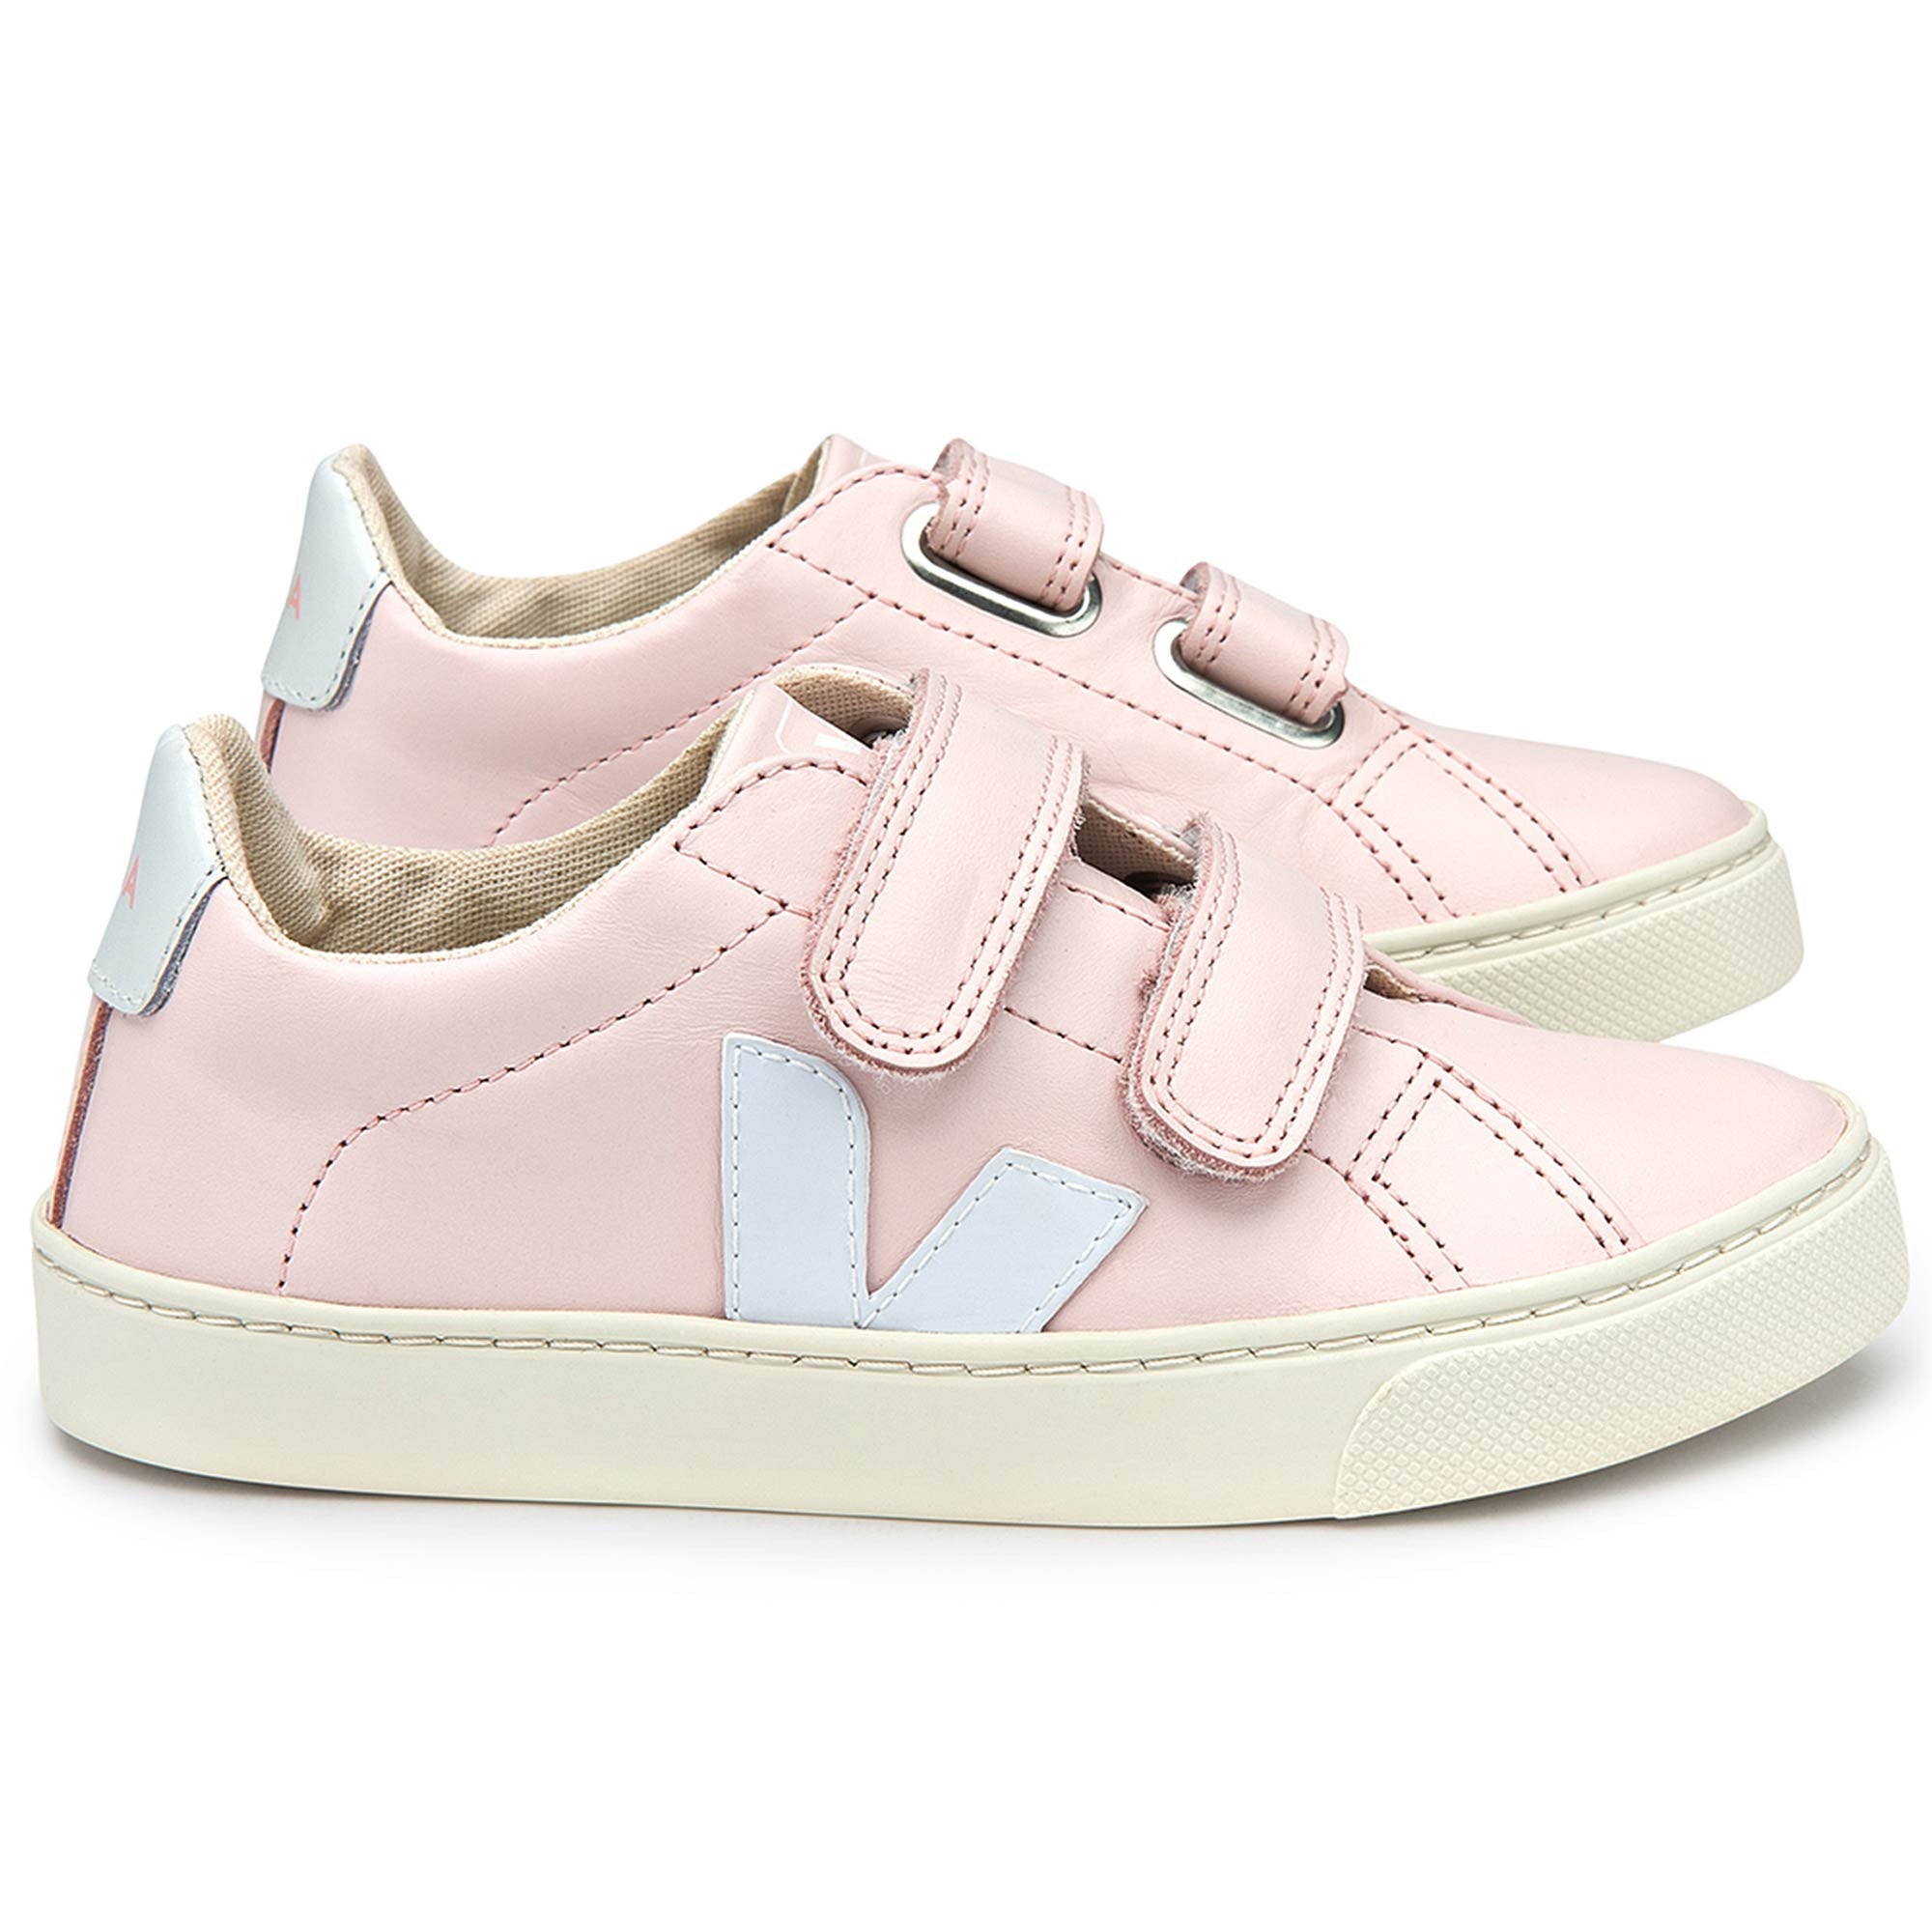 Girls Pink Leather Velcro Shoes - CÉMAROSE | Children's Fashion Store - 2